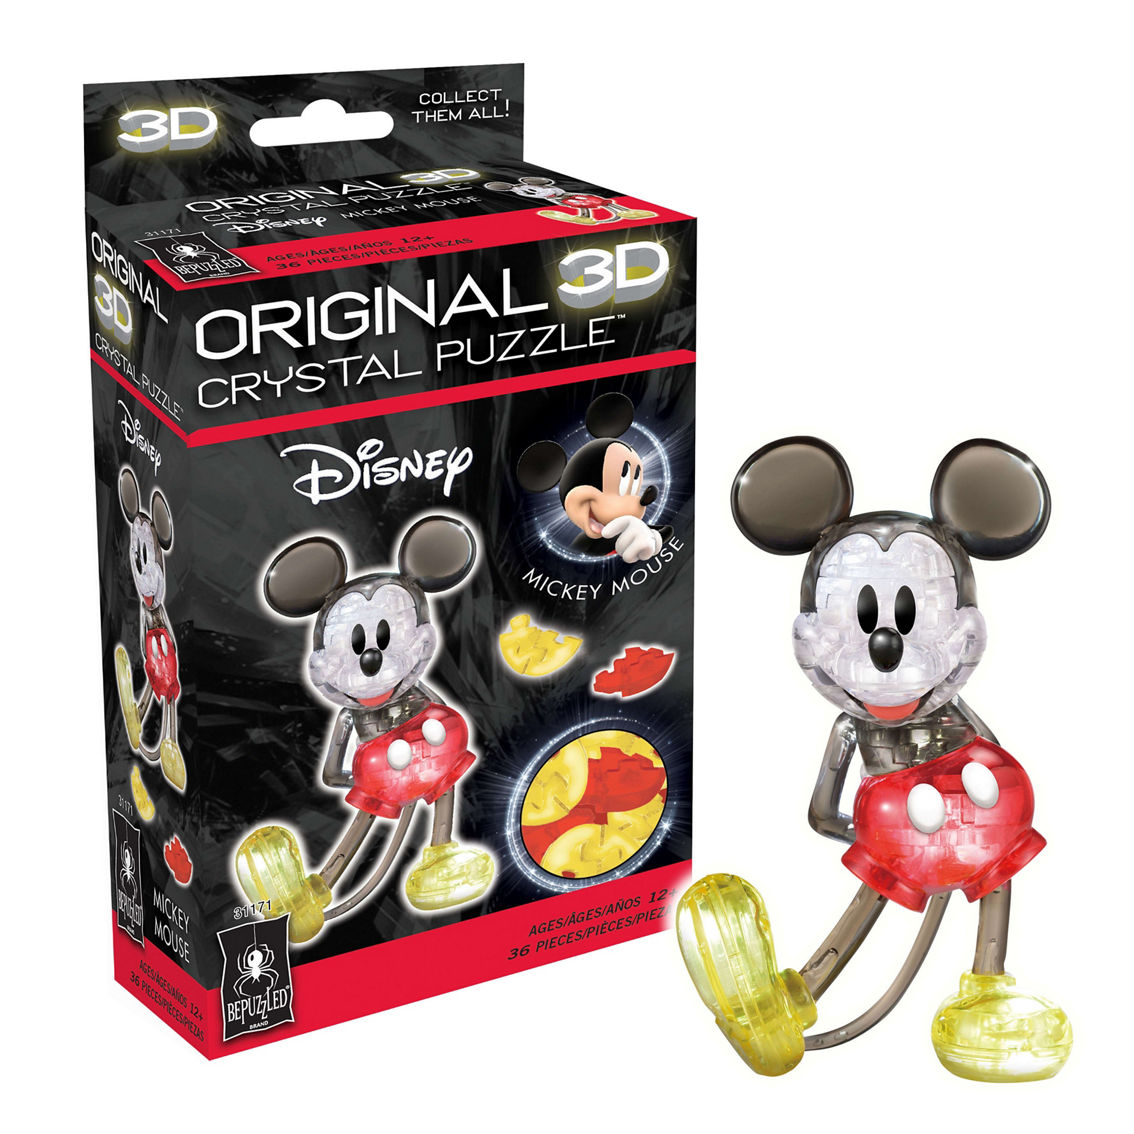 BePuzzled 3D Crystal Puzzle - Disney Mickey Mouse (Multi-Color): 36 Pcs - Image 2 of 5